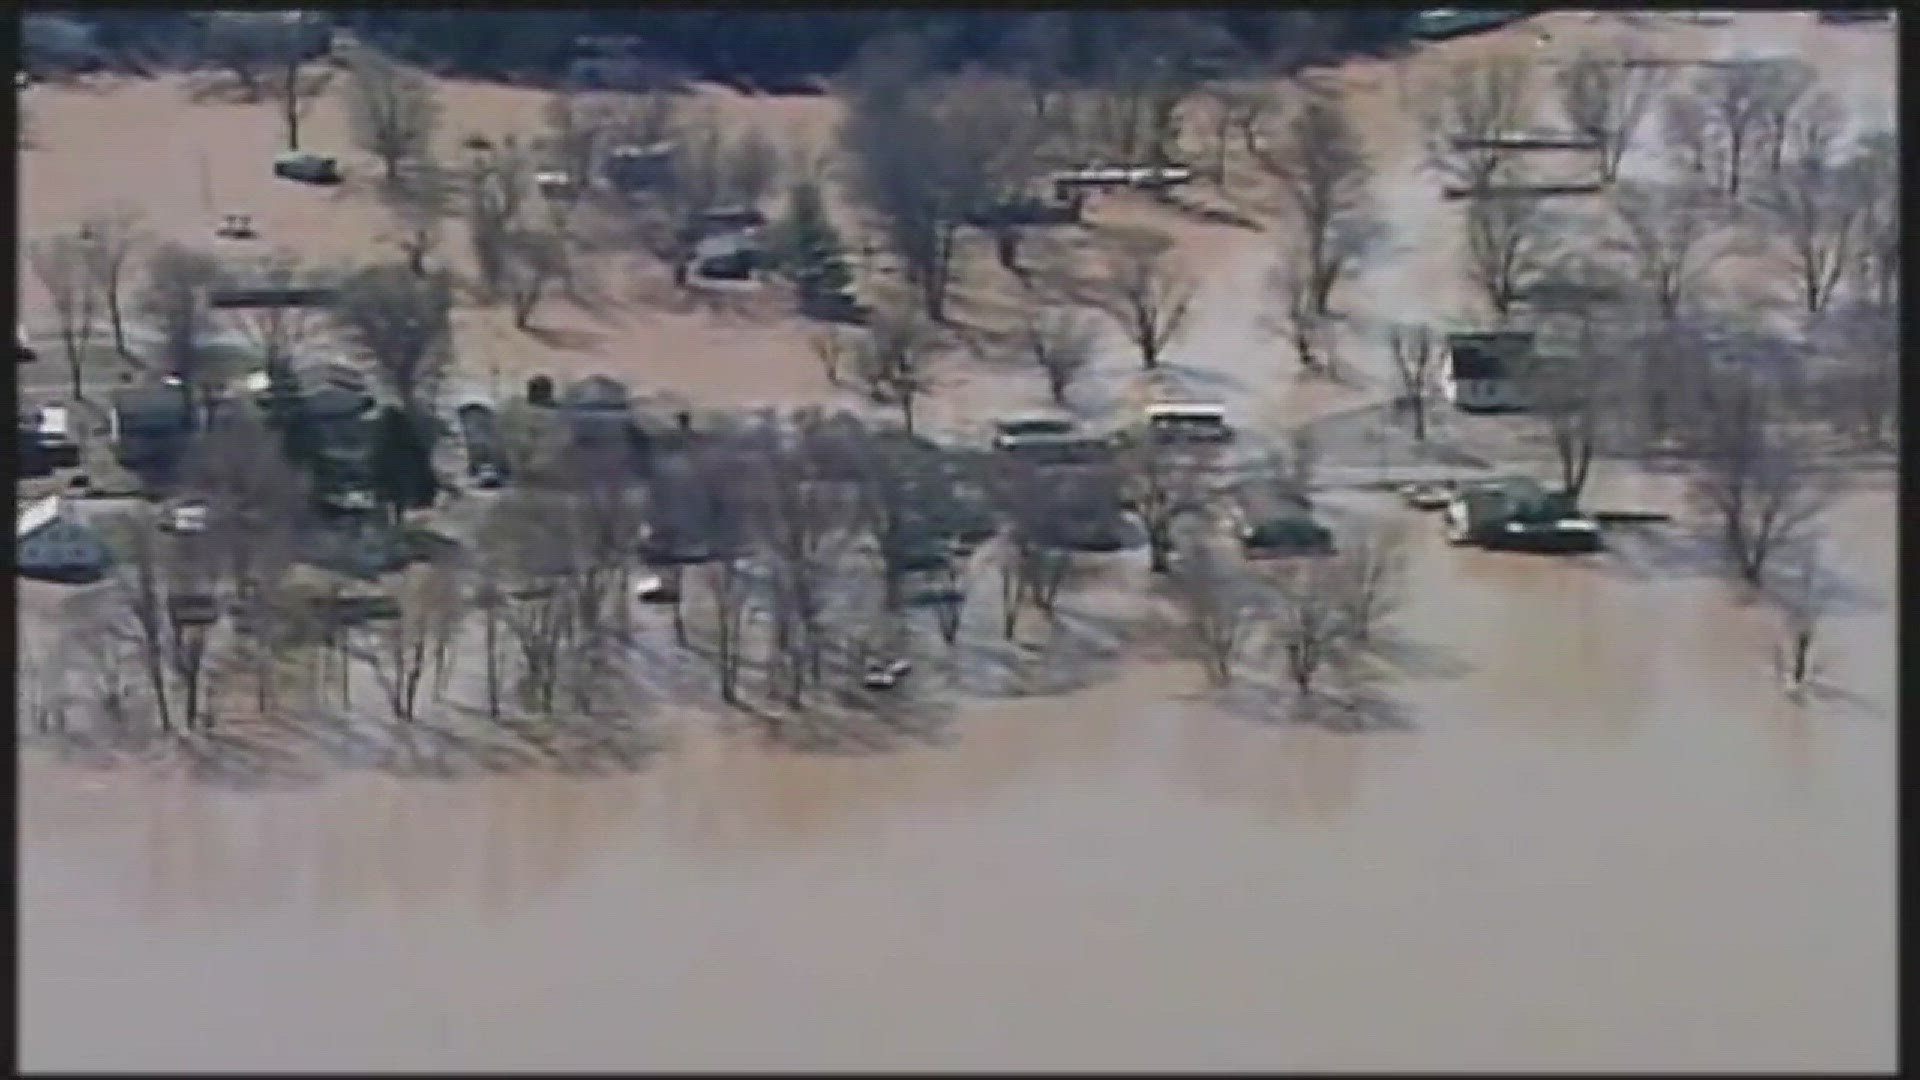 SKY11 was over the flooding in the Milton, Ky. and Madison, Ind. areas on Feb. 26.